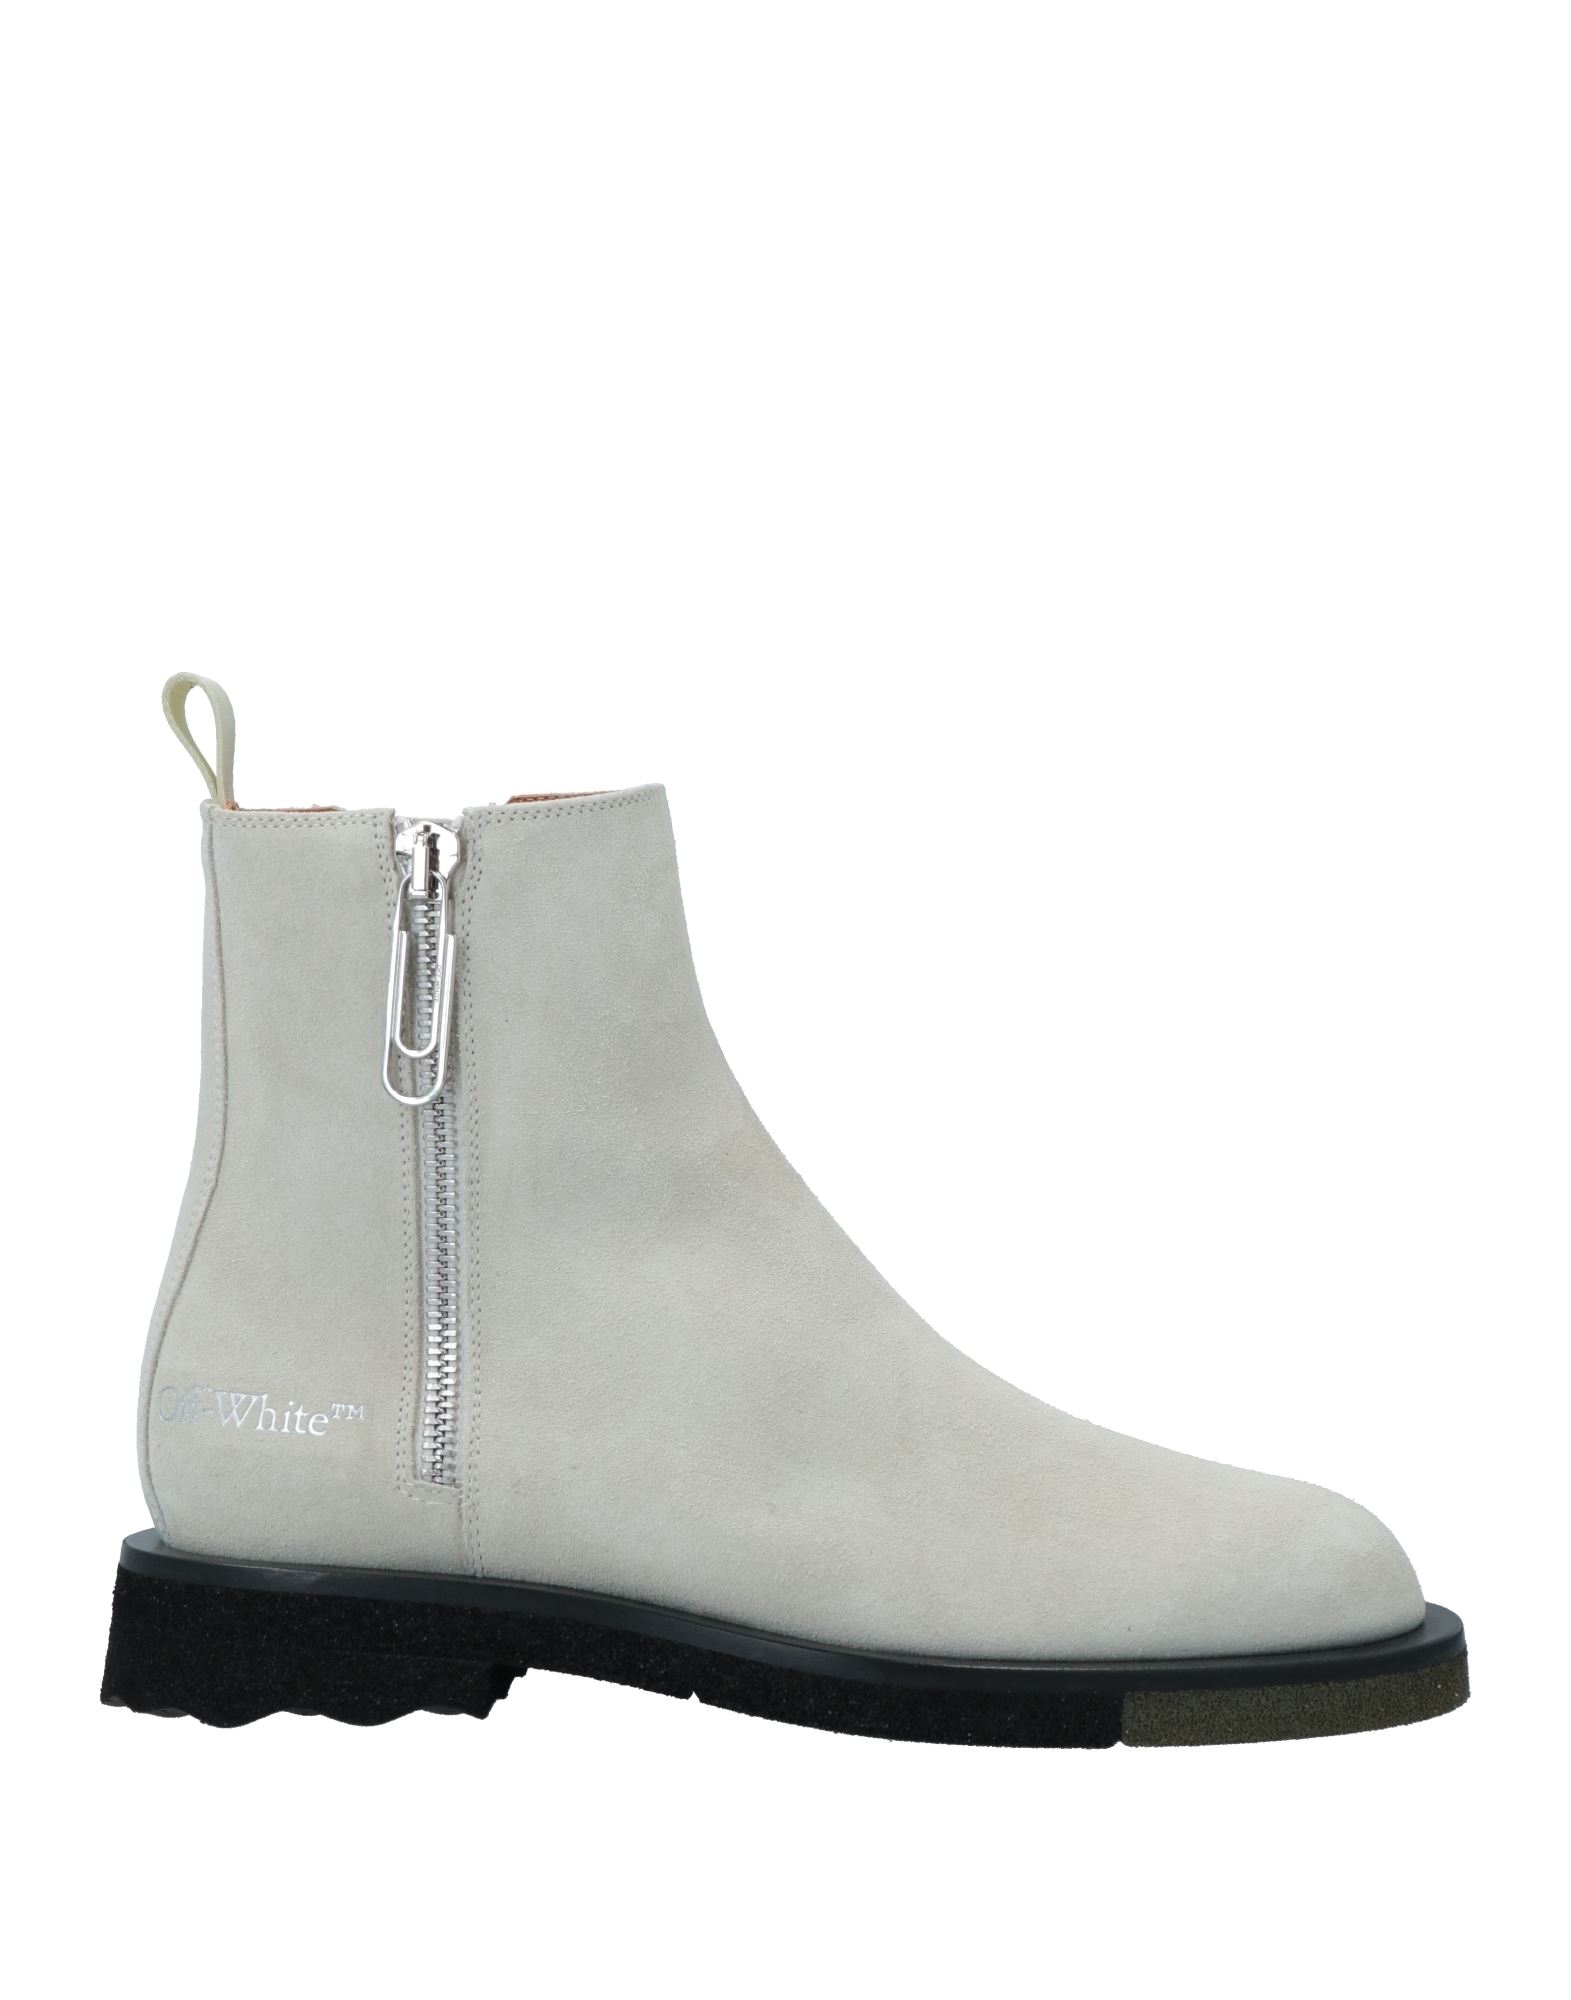 Off-white Man Ankle Boots Ivory Size 7 Soft Leather